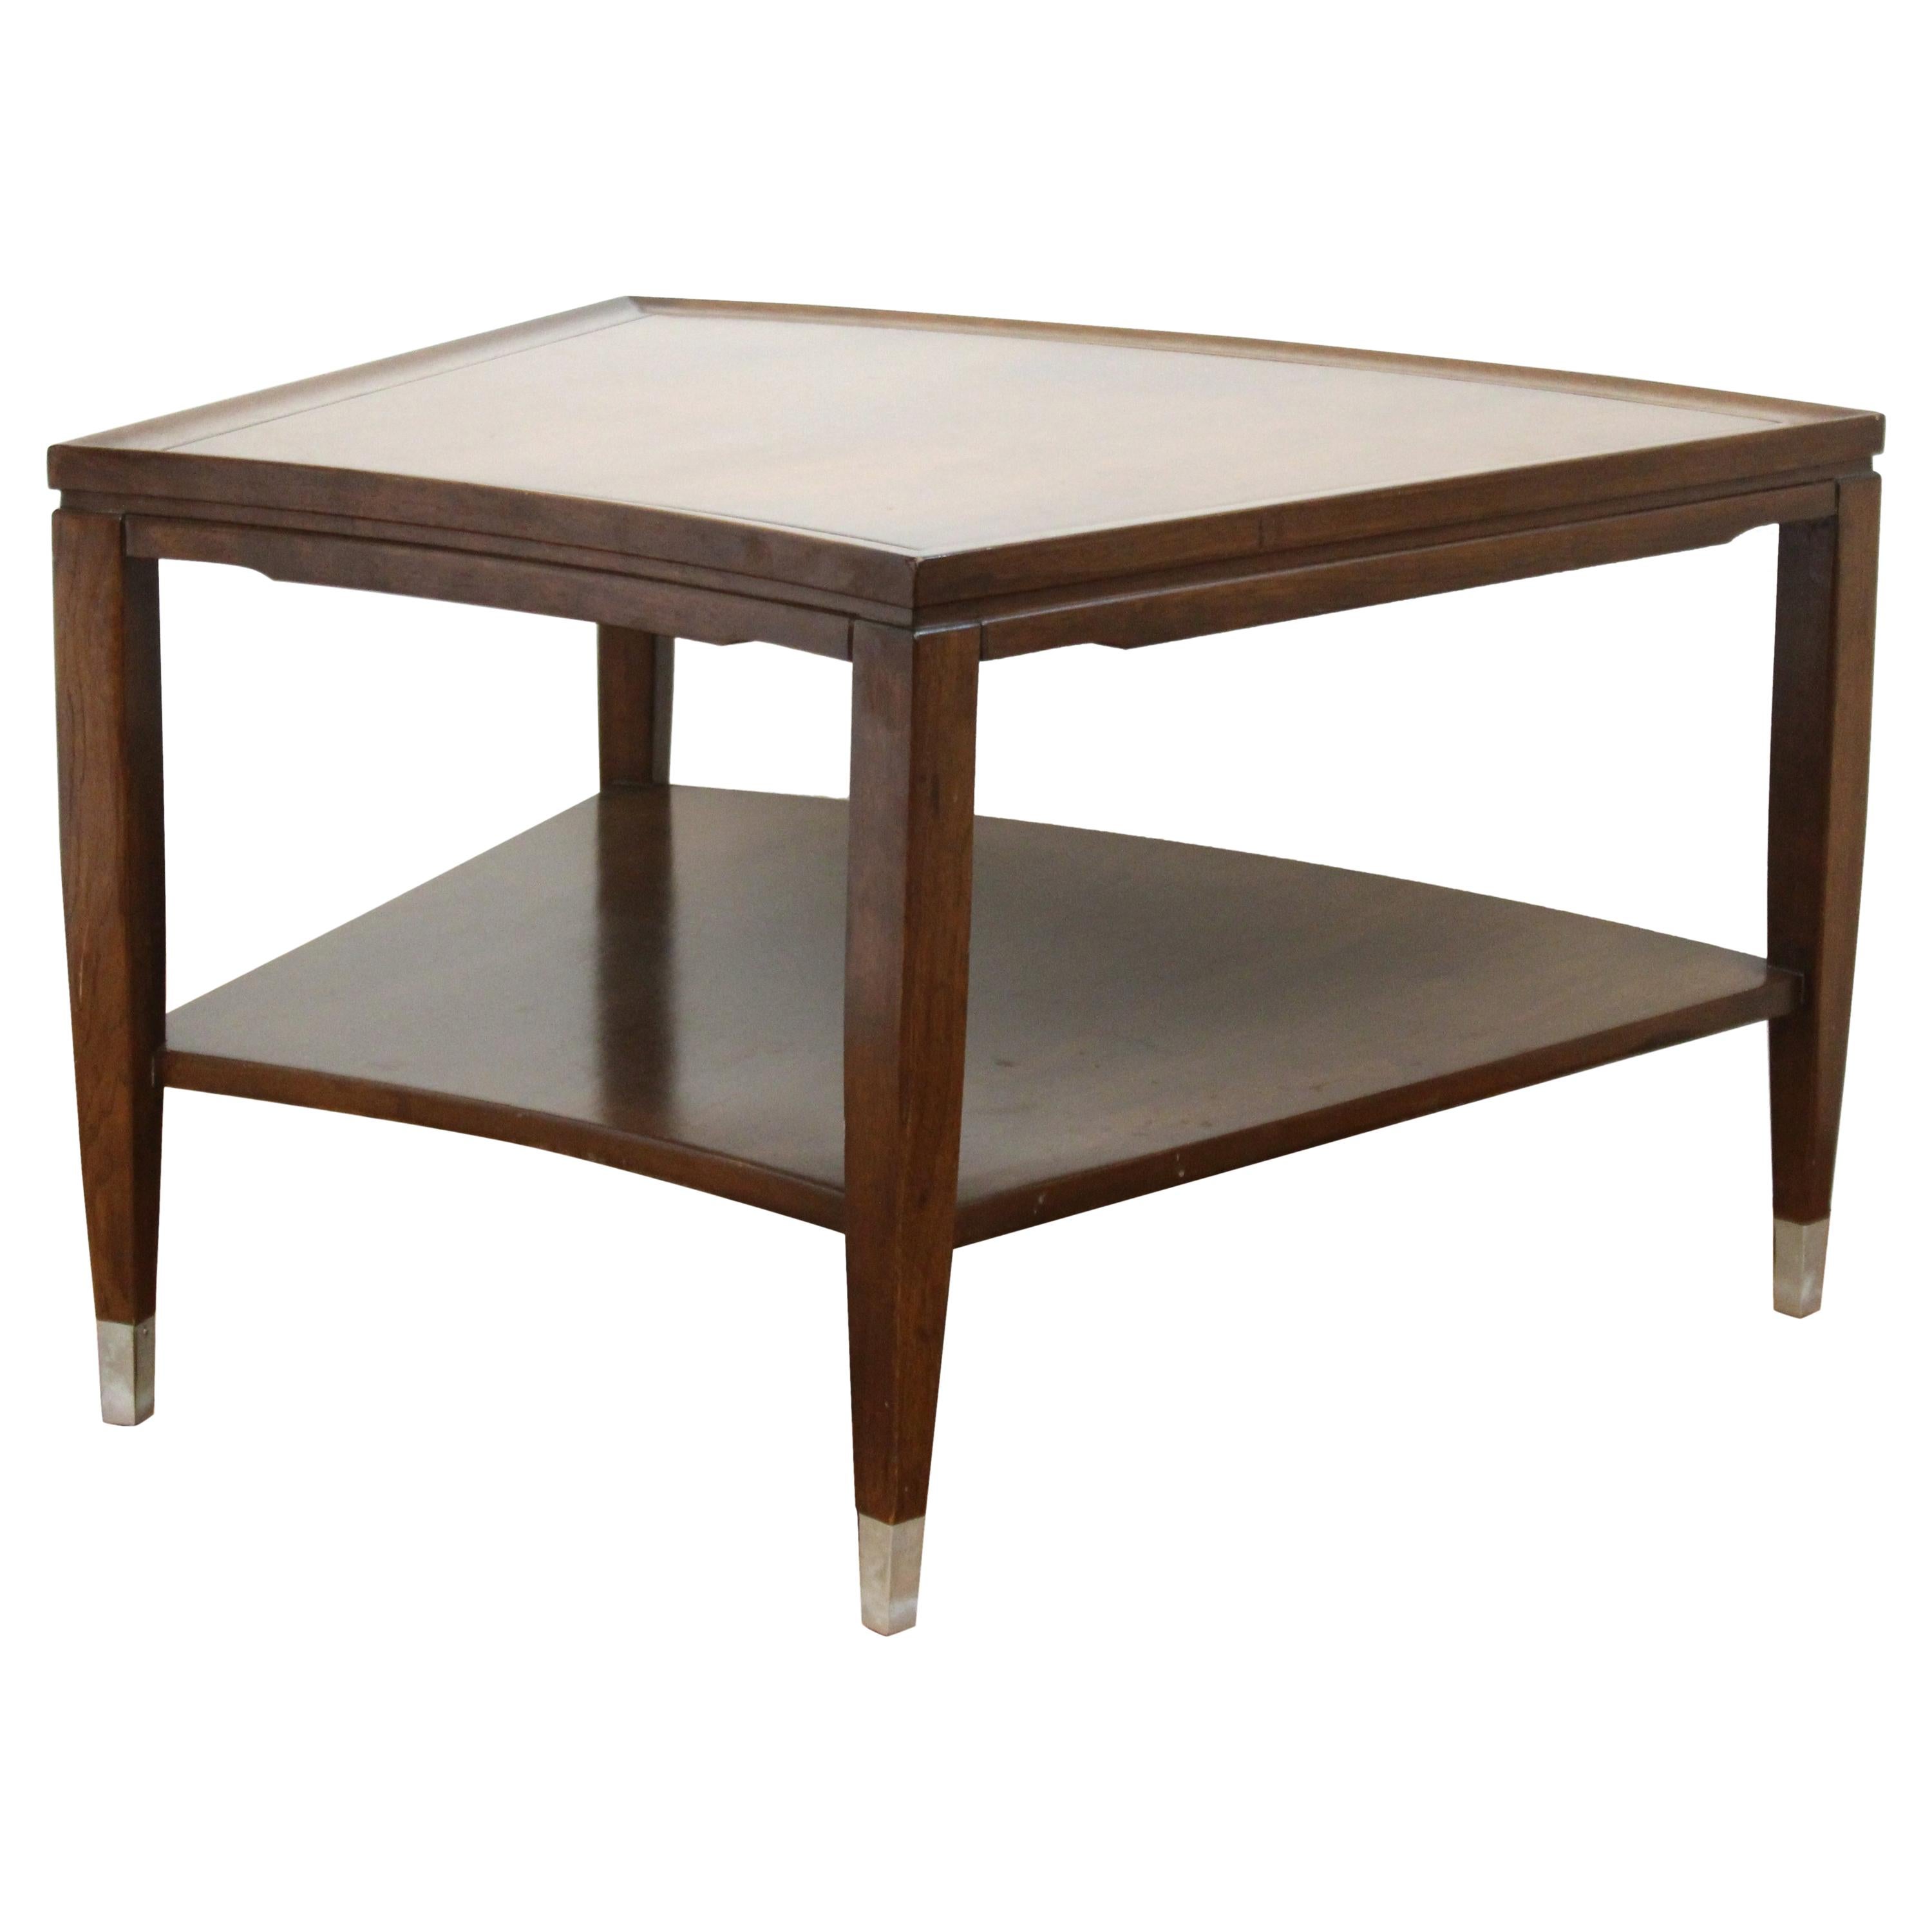 Table d'appoint Mid-Century Modern (table d'appoint)